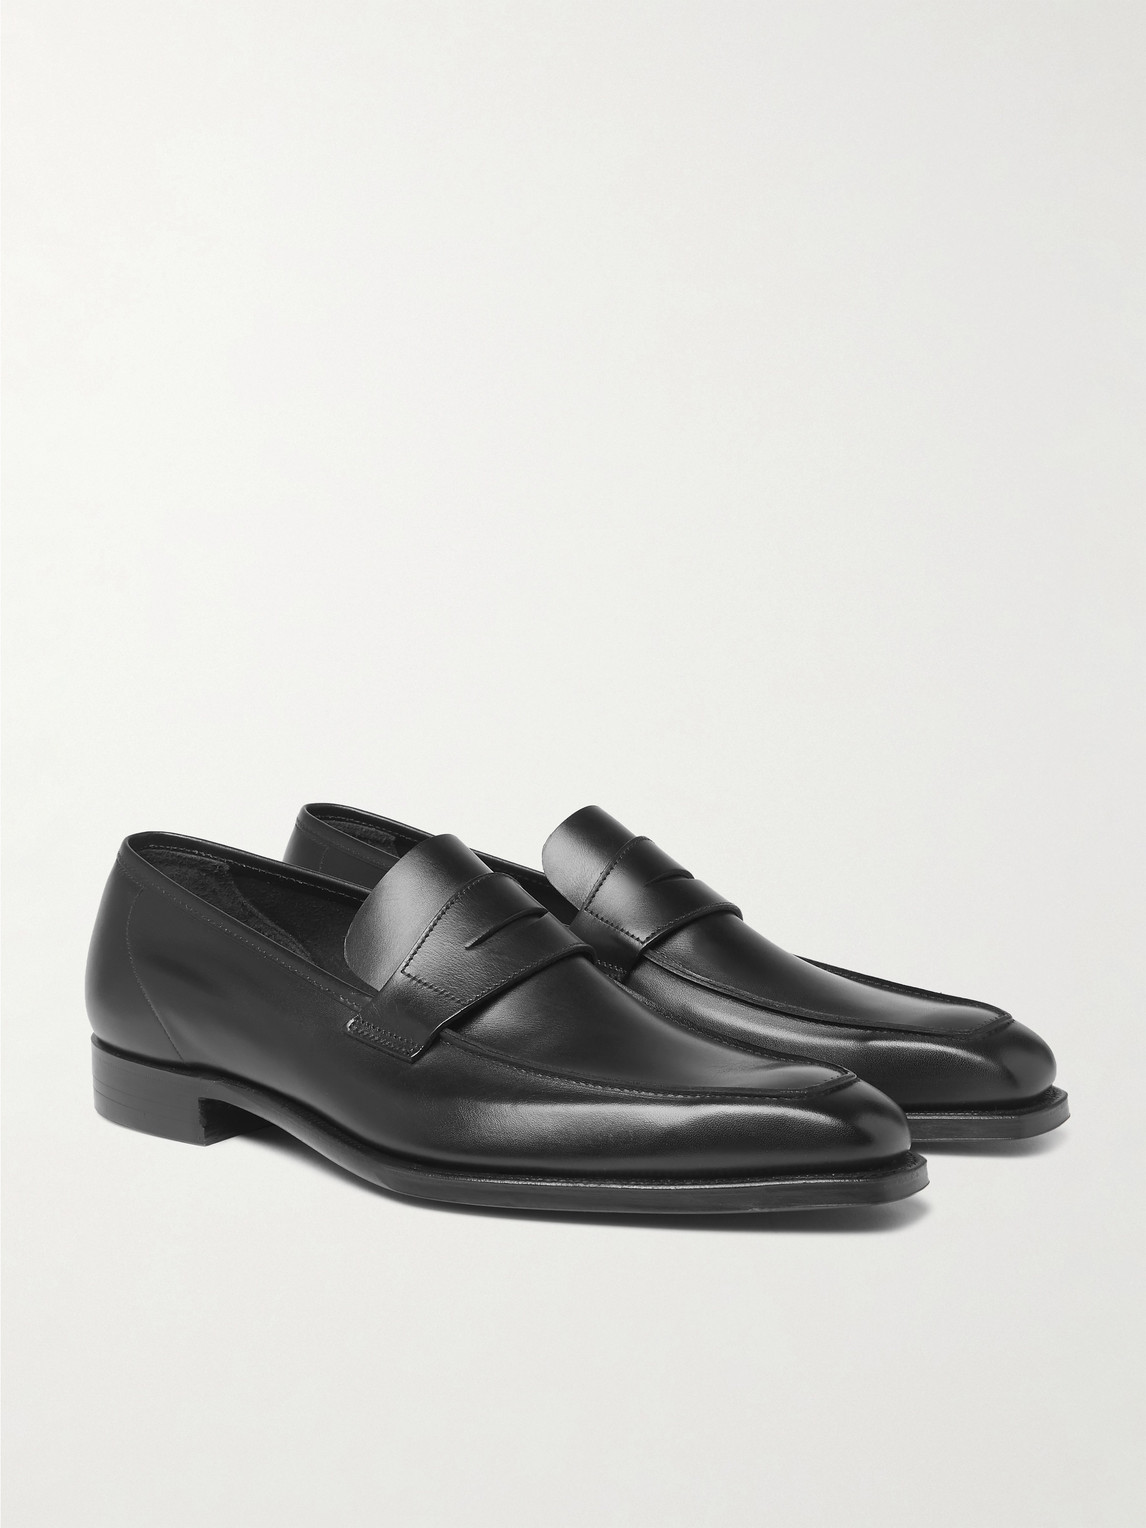 GEORGE CLEVERLEY GEORGE LEATHER PENNY LOAFERS